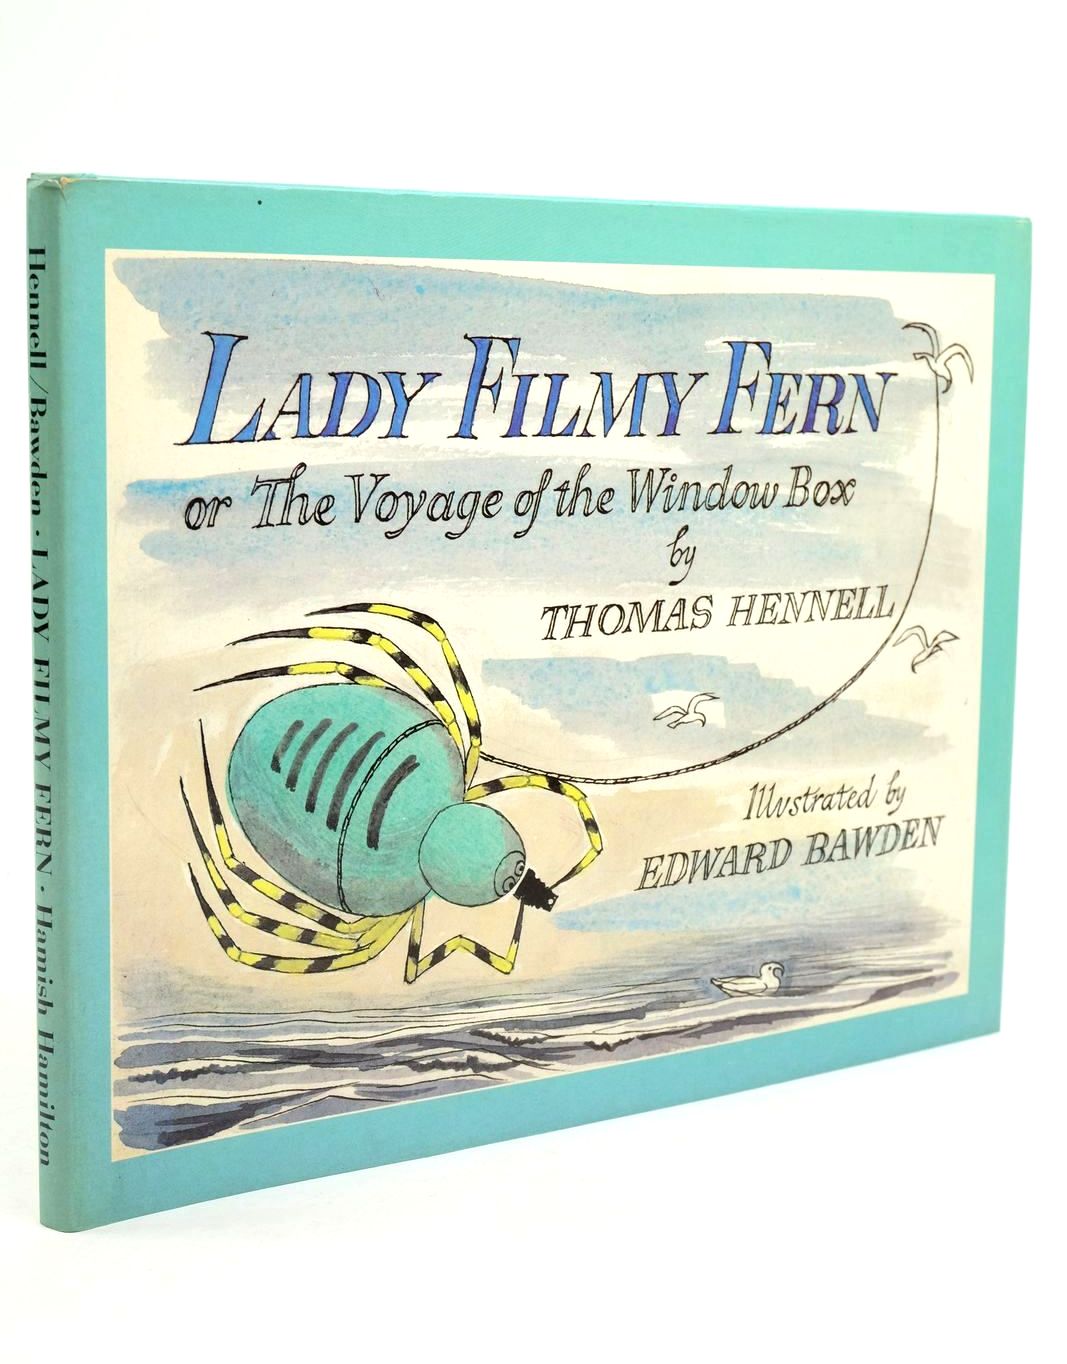 Photo of LADY FILMY FERN written by Hennell, Thomas illustrated by Bawden, Edward published by Hamish Hamilton (STOCK CODE: 1323079)  for sale by Stella & Rose's Books